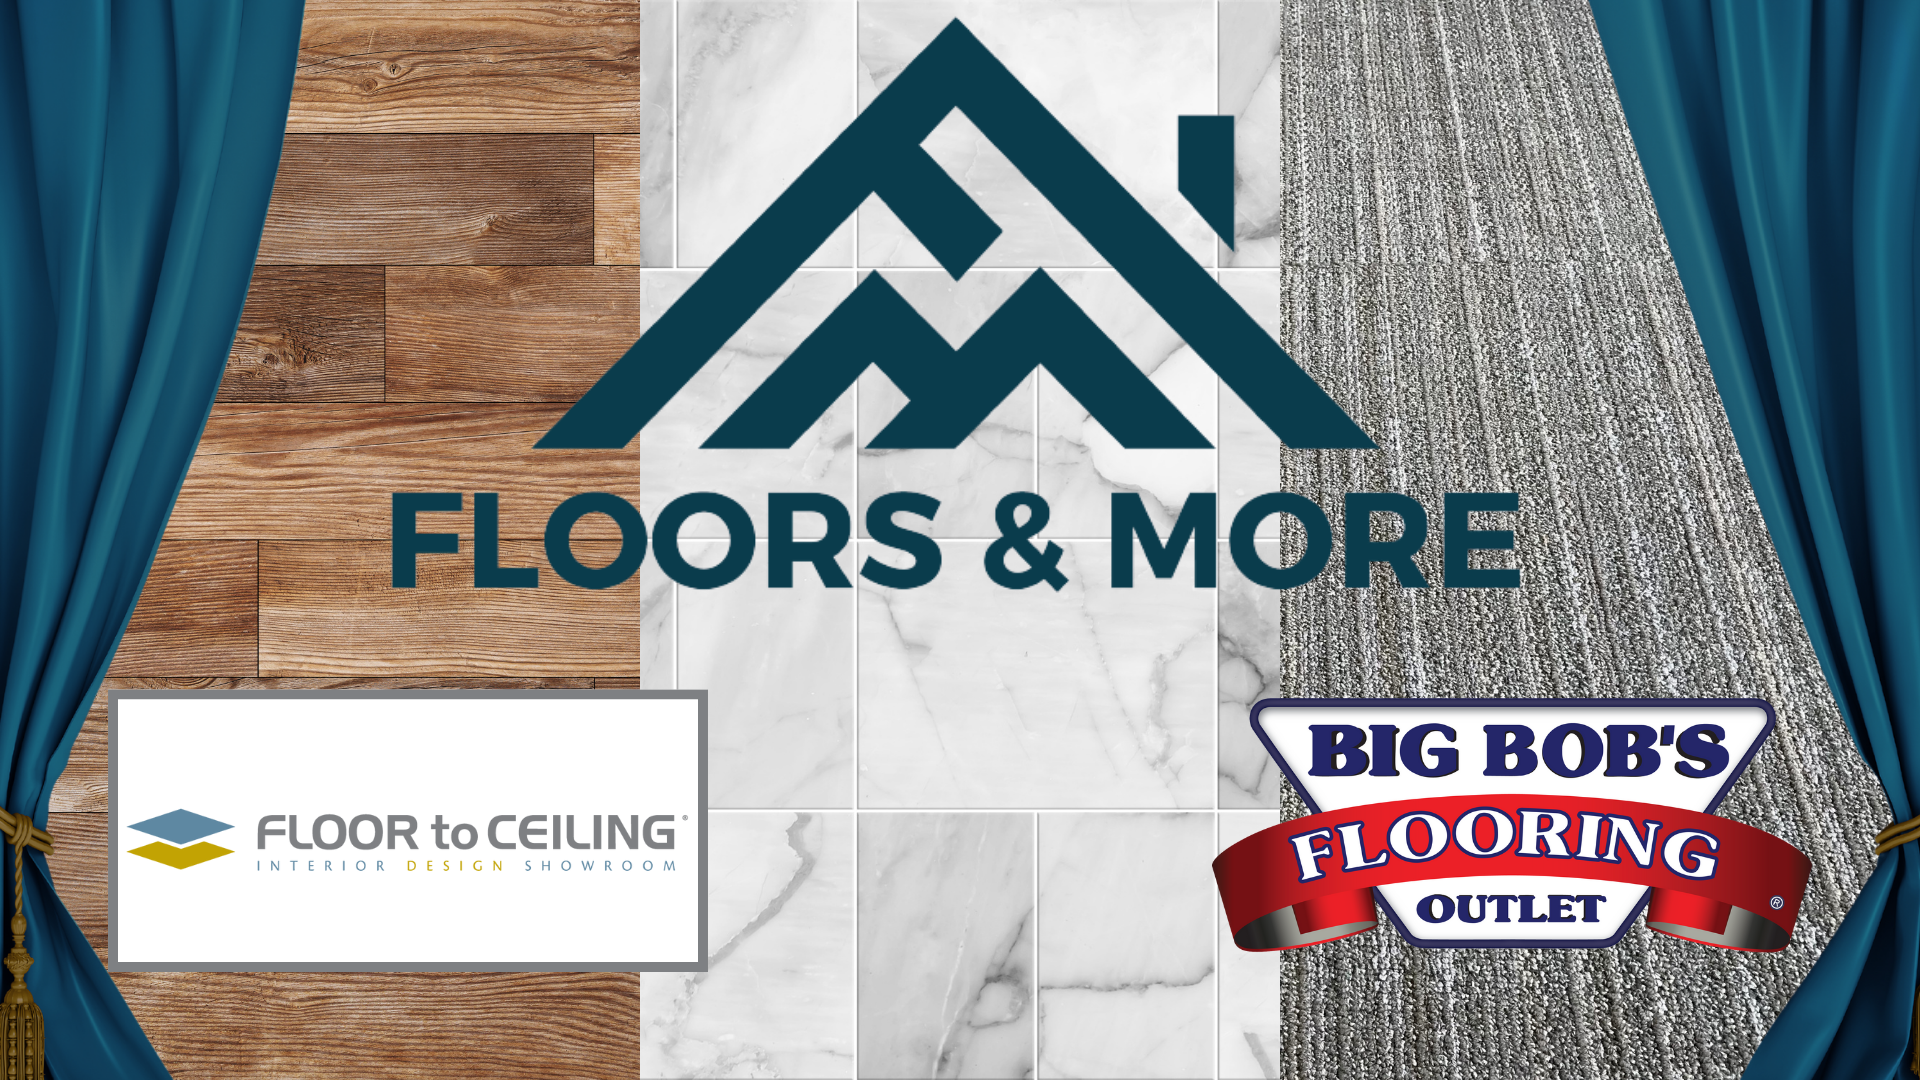 Three large logos on a background of vertical stripes of hardwood, tile and carpet flooring. The top logo is  a dark blue stylized image of the roof of a house comprised of the letters F and M, above the words Floors & More. The bottom left logo is an image of a blue and yellow square adjacent to the words Floor to Ceiling interior design showroom in grey, blue and yellow. The bottom right logo is an inverted trapezoid with a red banner overlaid containing the words Big Bob's Flooring Outlet. 